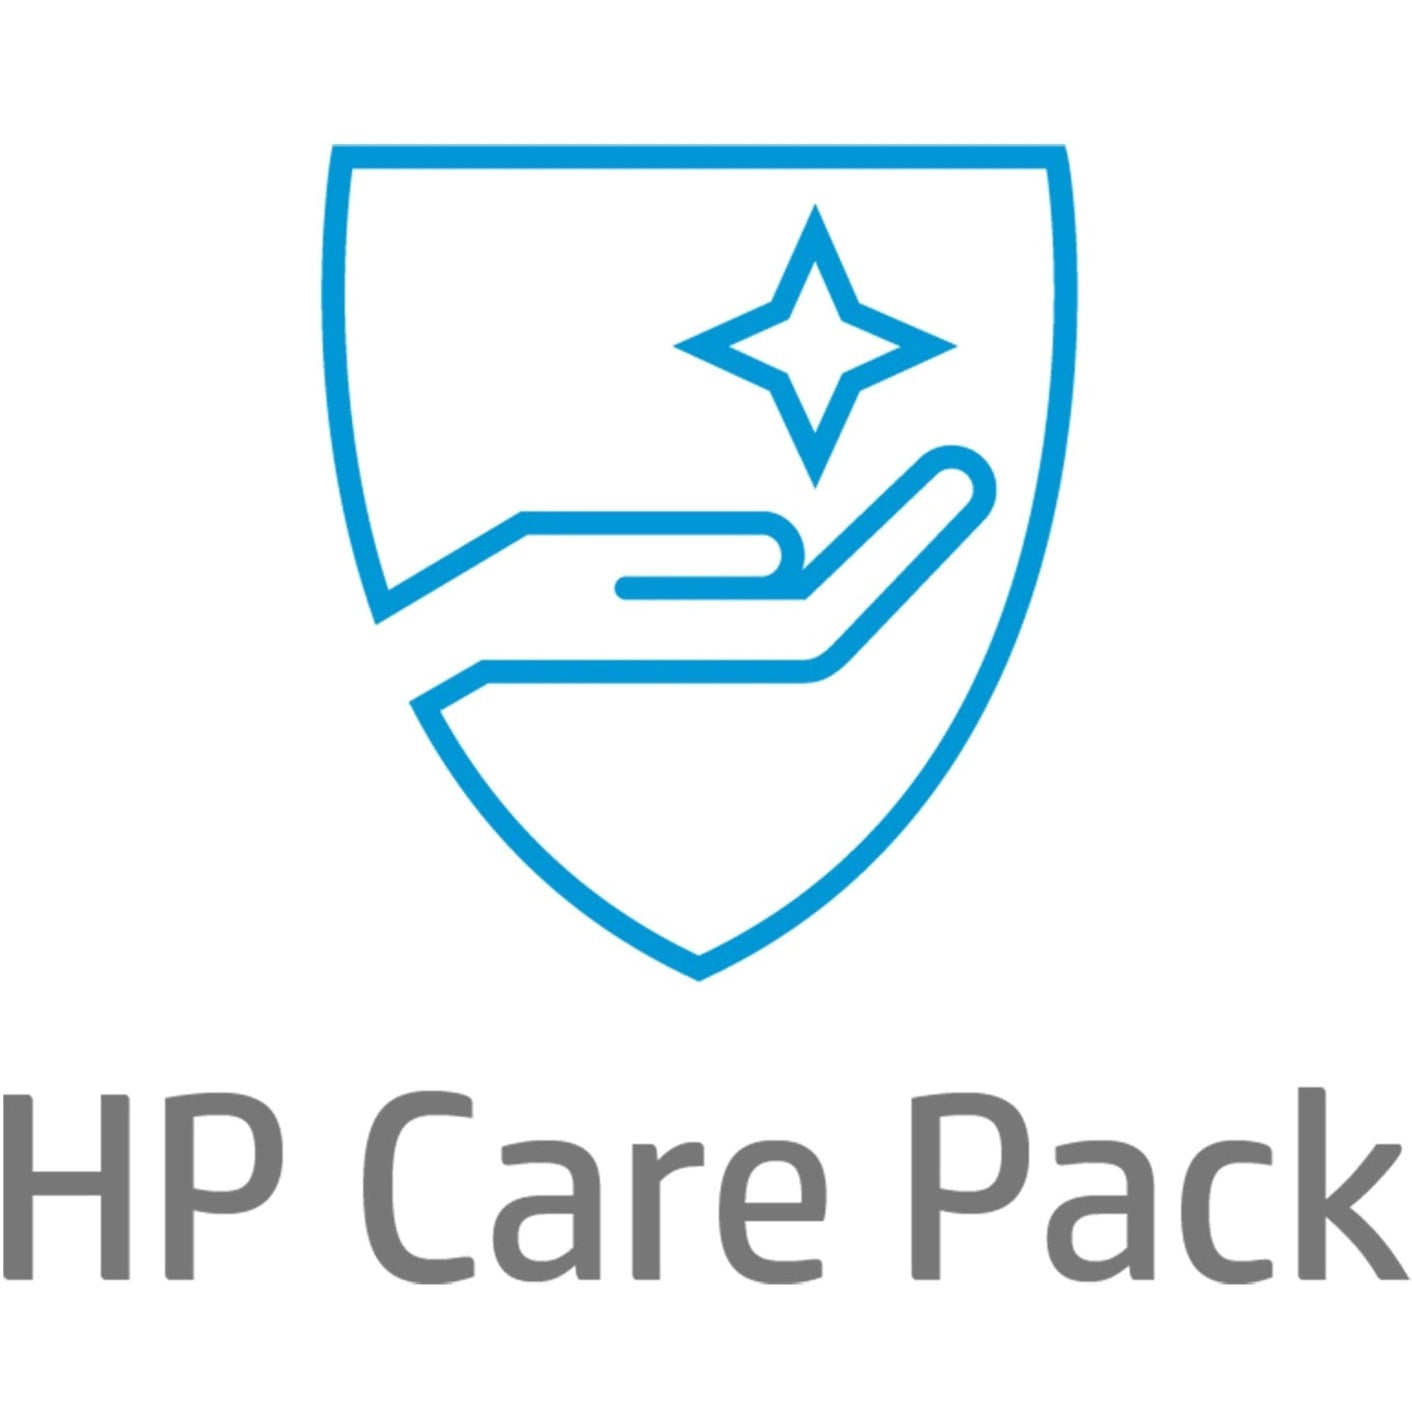 HP Care Pack - Extended Service - 2 Year - Service (U9AZ8E)